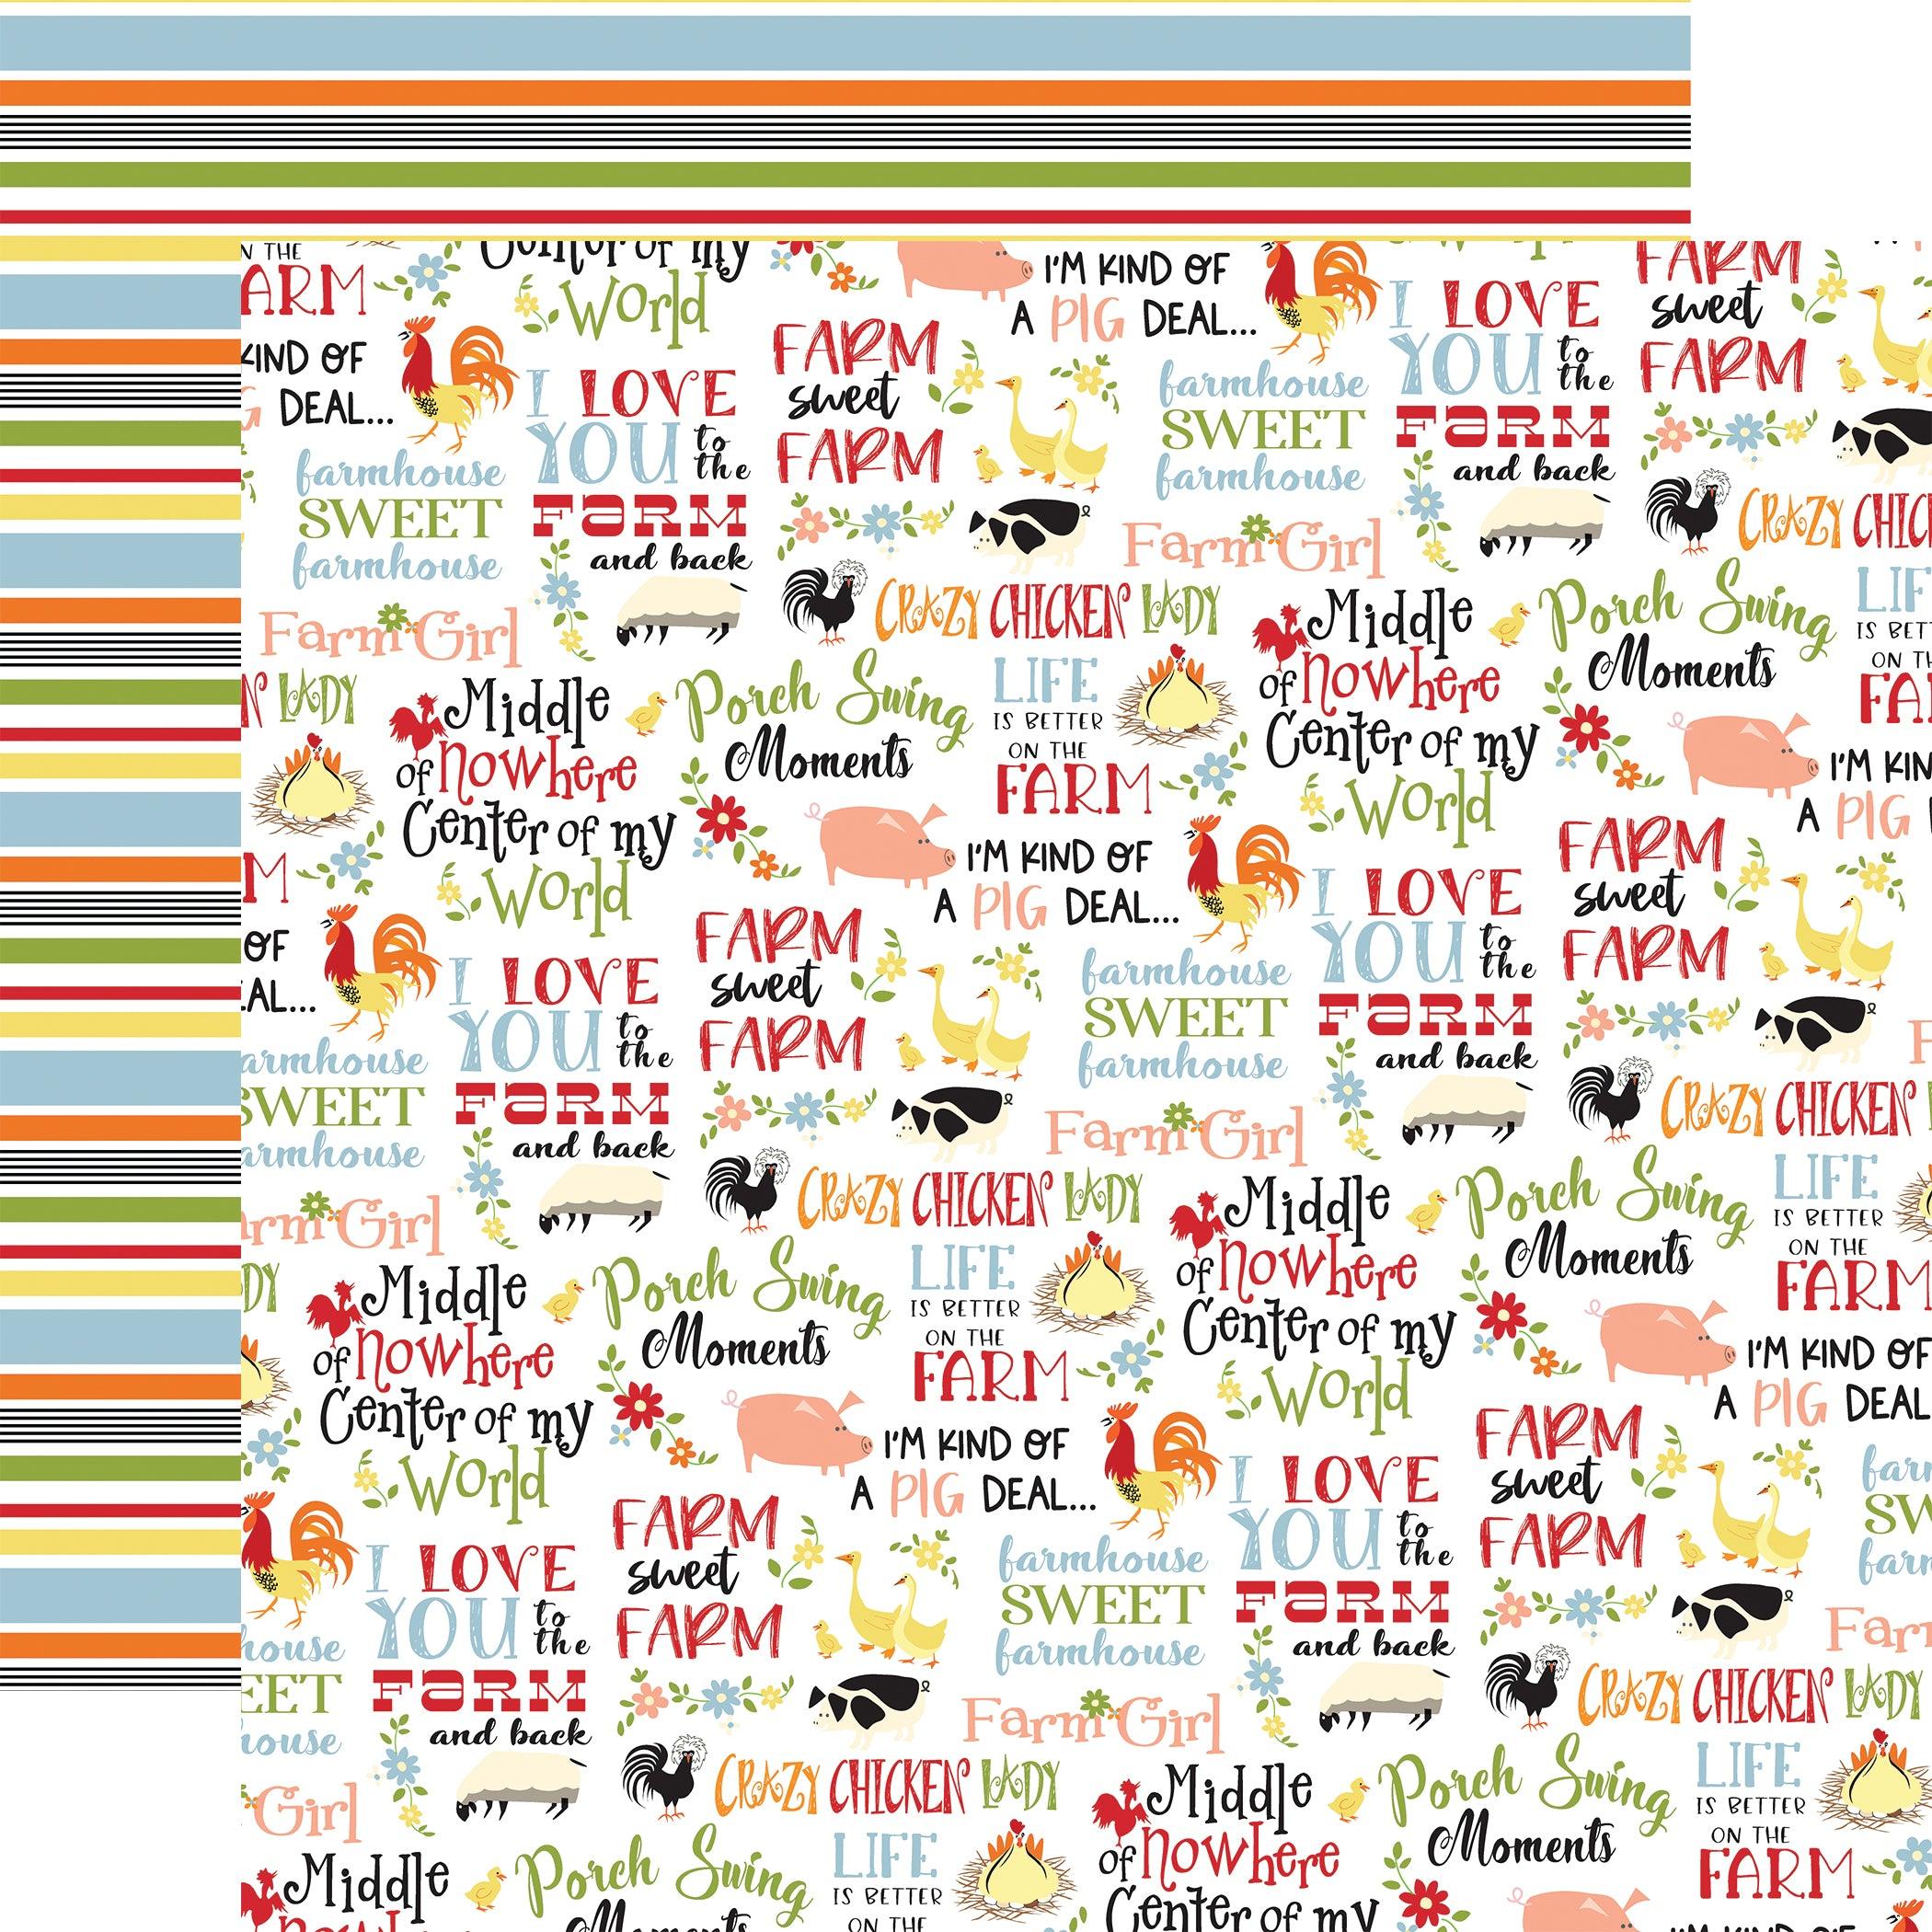 Farmhouse Living Collection Farm Girl Phrases 12 x 12 Double-Sided Scrapbook Paper by Carta Bella - Scrapbook Supply Companies